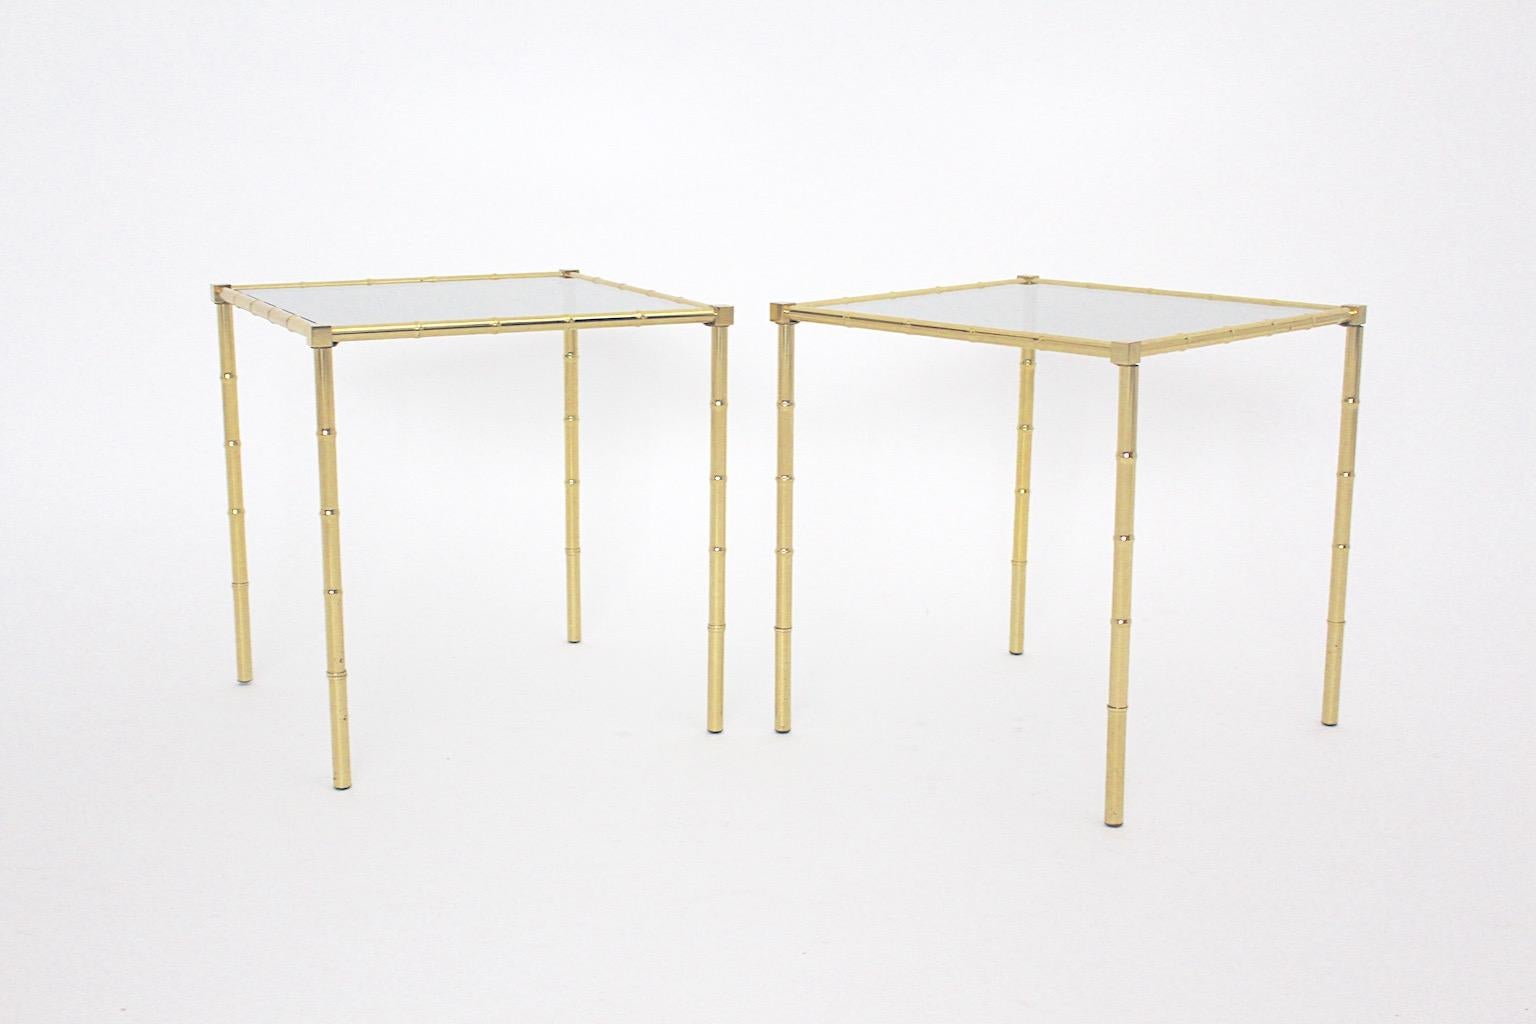 Mid Century Modern vintage brass faux bamboo side tables sofa tables pair duo with greenish glass plate 1960s France.
A charming pair or duo of side table or sofa table from brass in faux bamboo optic 1960s France.
This pair of side tables features